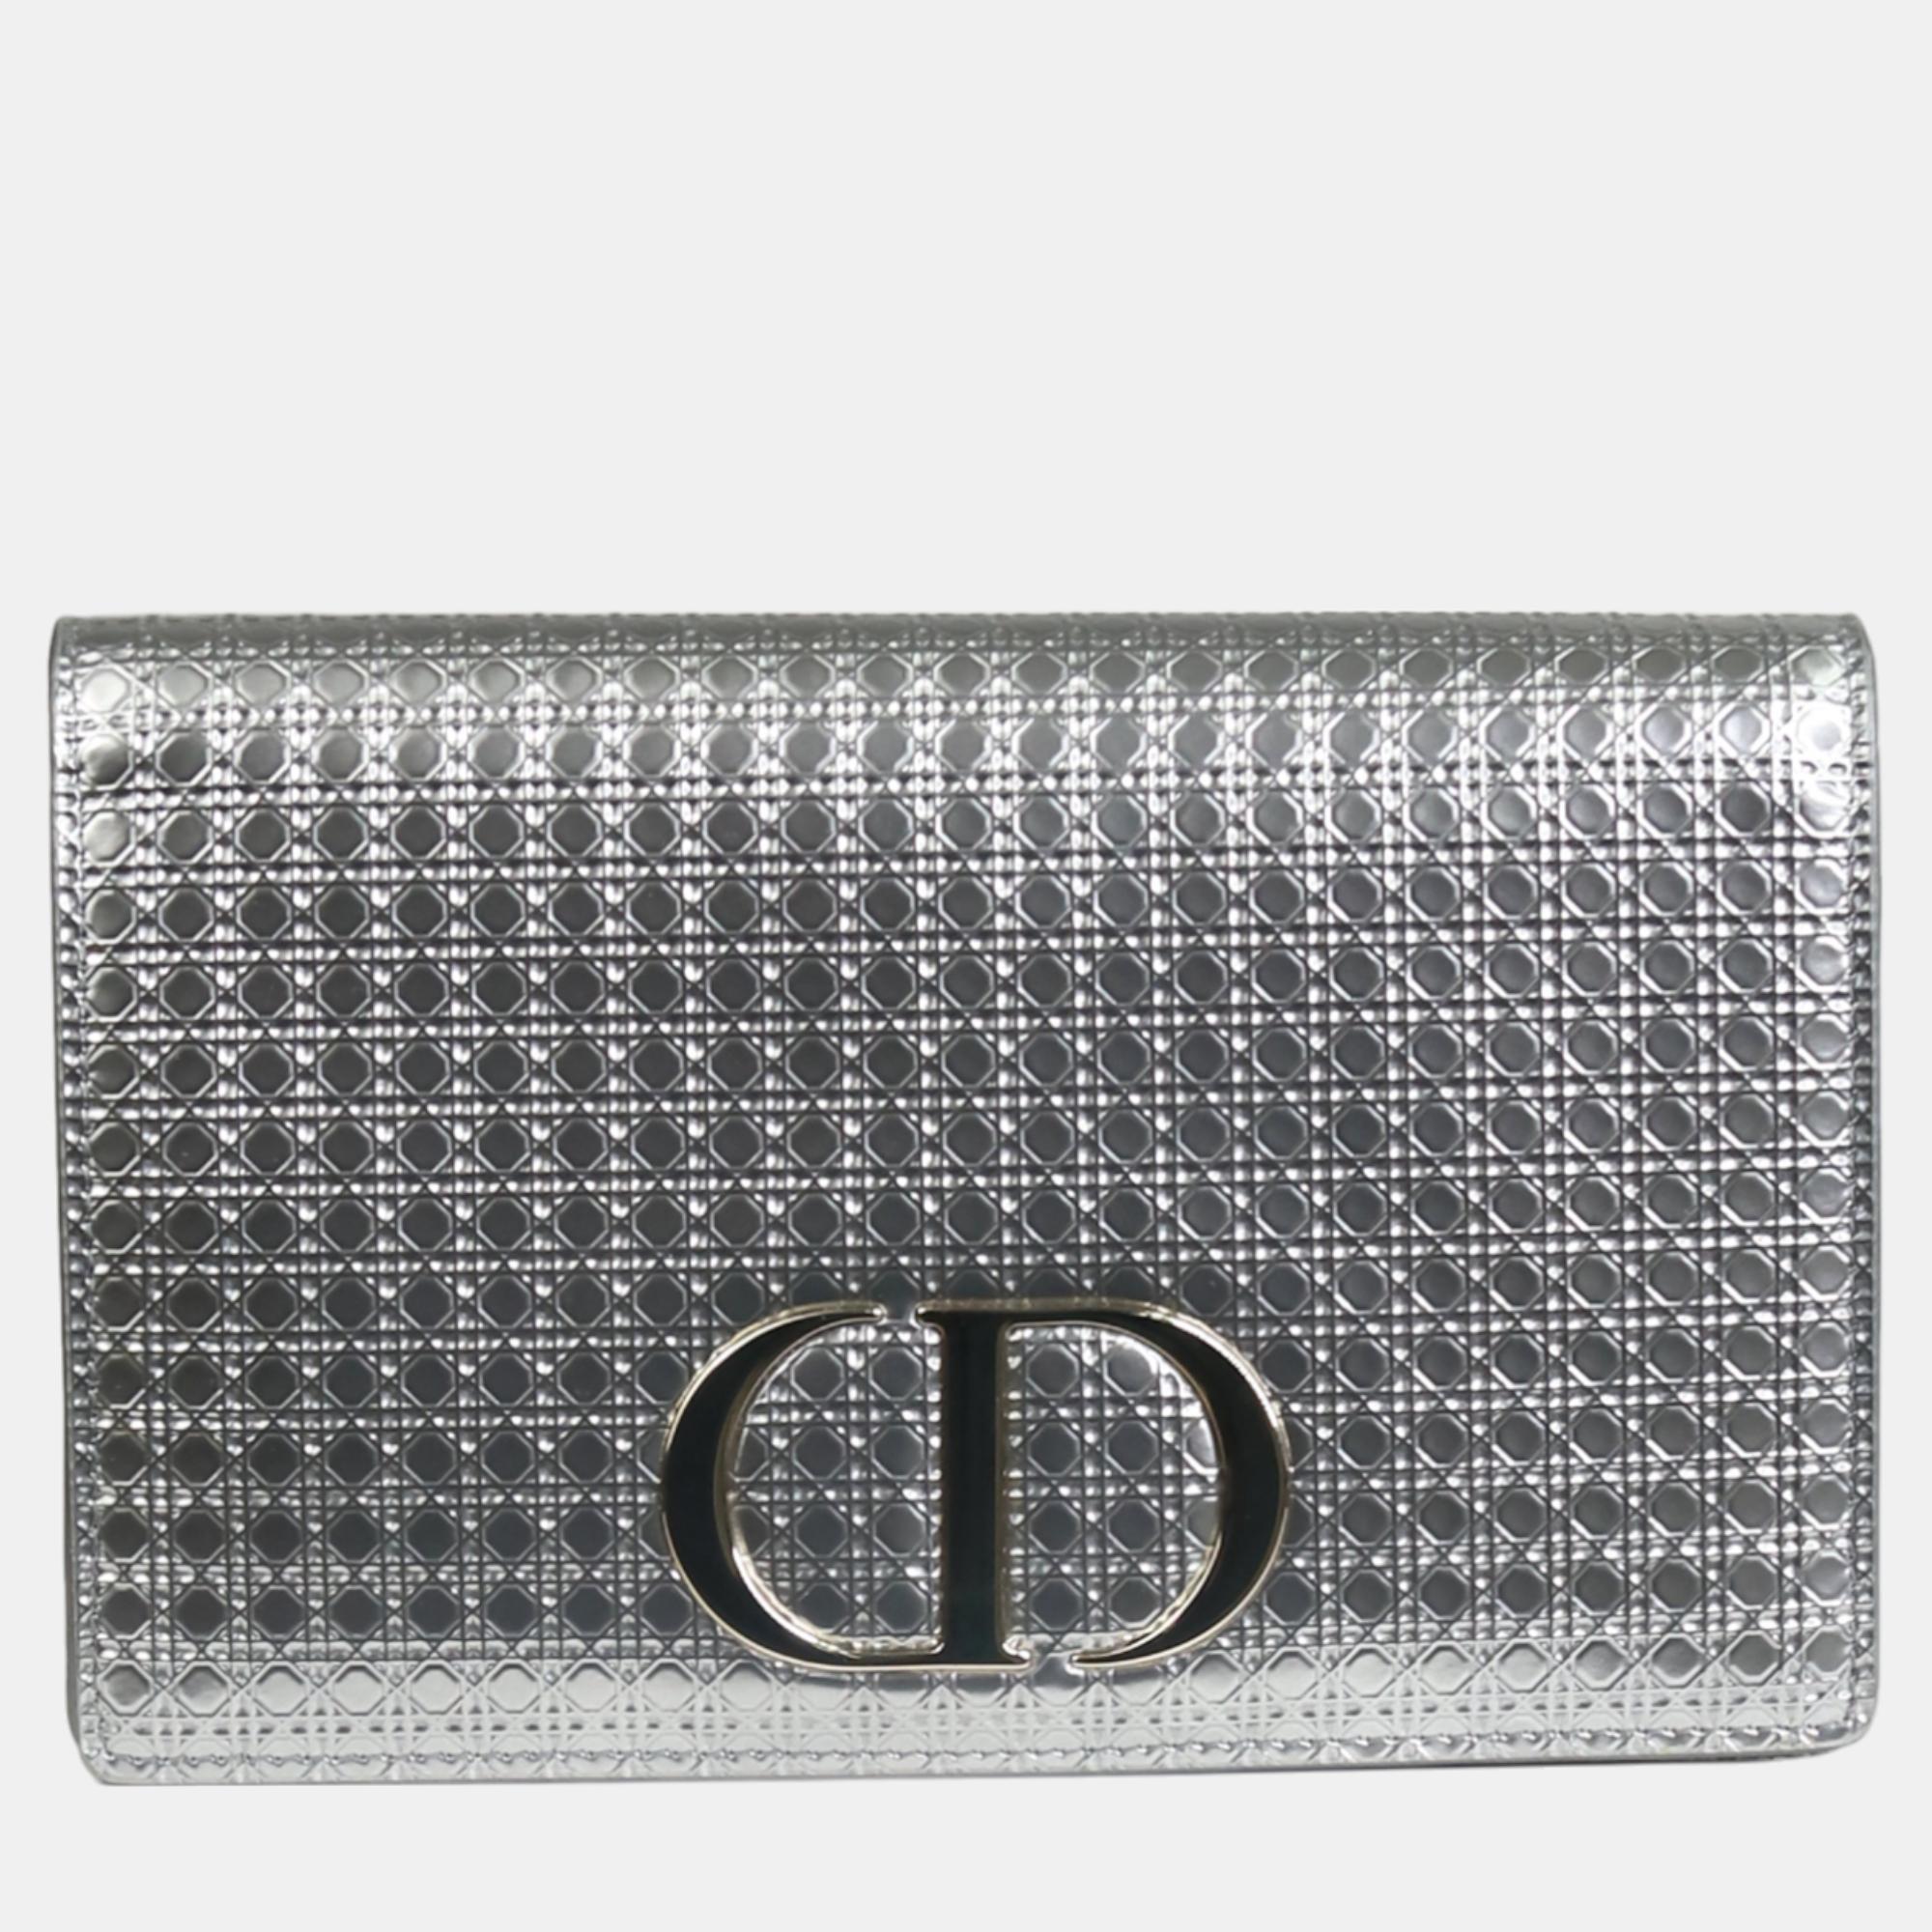 Dior silver leather 2-in-1 30 montaigne belt and shoulder bag